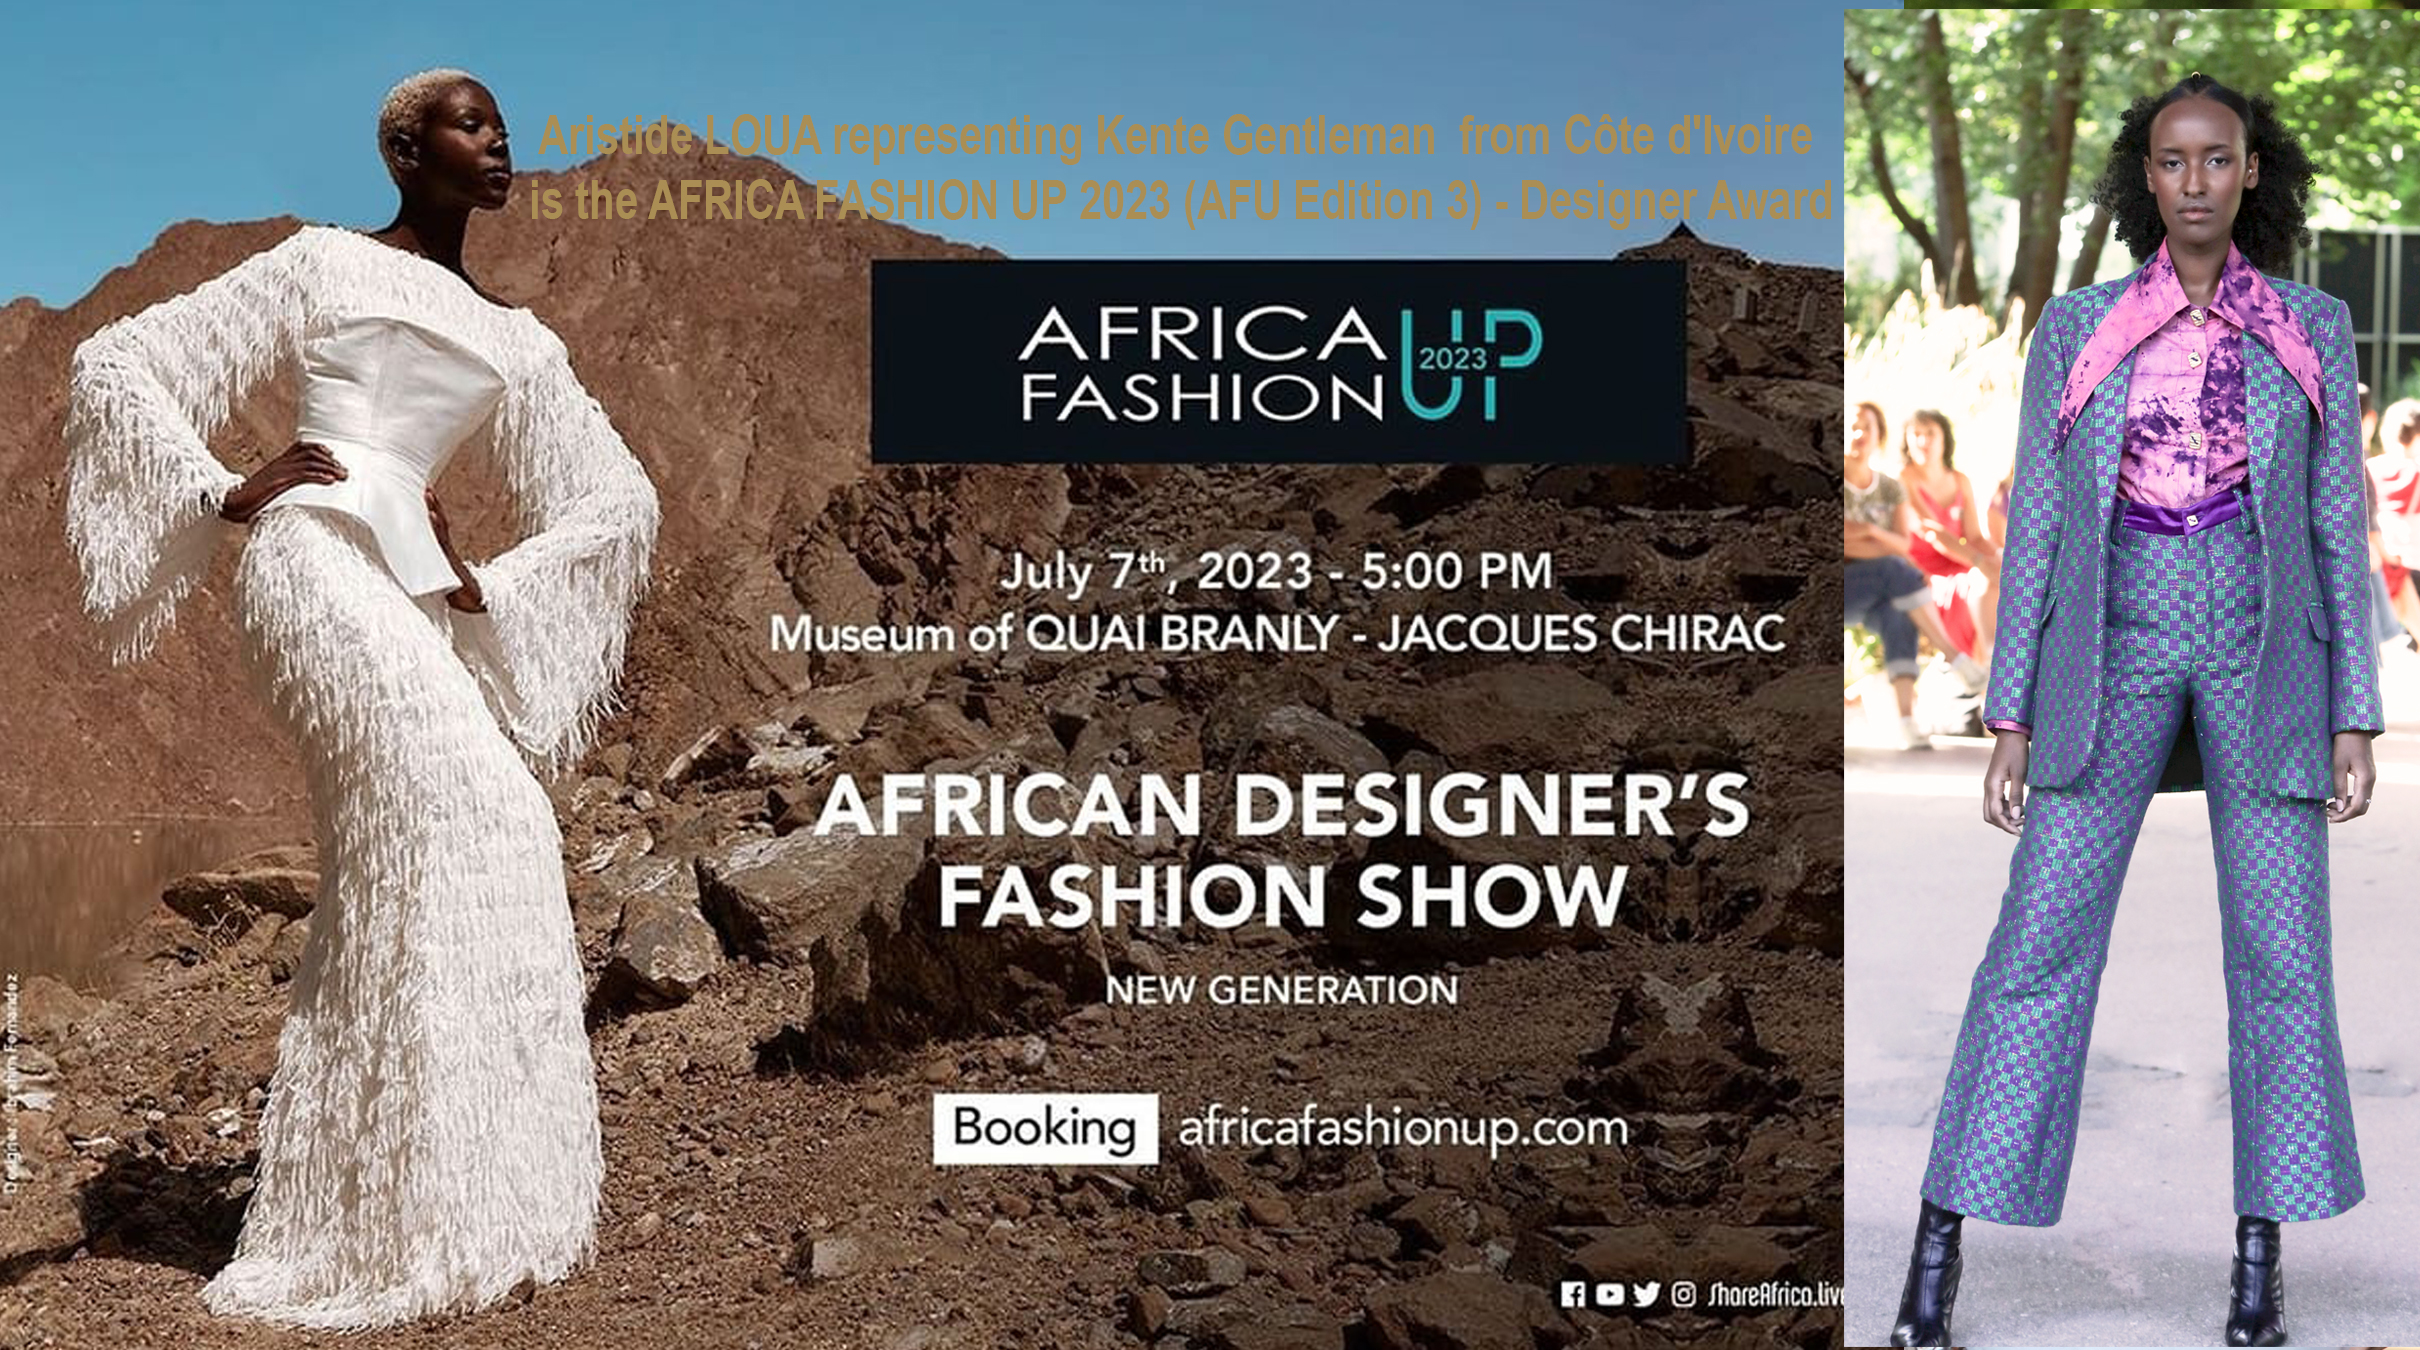 AFRICA-VOGUE-COVER-Aristide-LOUA-representing-Kente-Gentleman-from-Côte-d'Ivoire-is-the-AFRICA-FASHION-UP-2023-AFU-Edition-3-Designer-Award-DN-AFRICA-Media-Partner